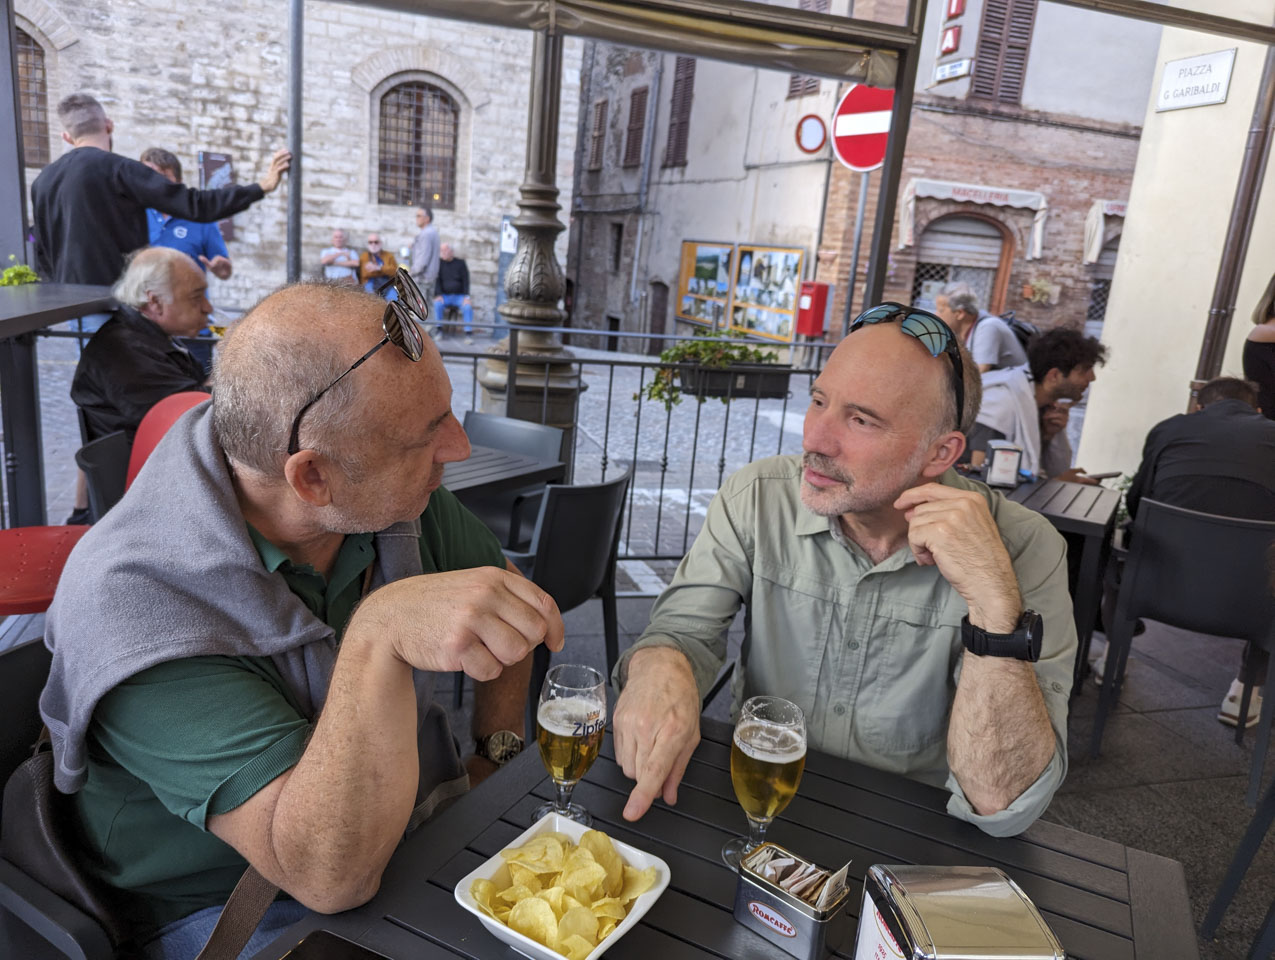 Francesco and Paul seated at a table and having a conversation, with some potato chips and each with a glass of beer